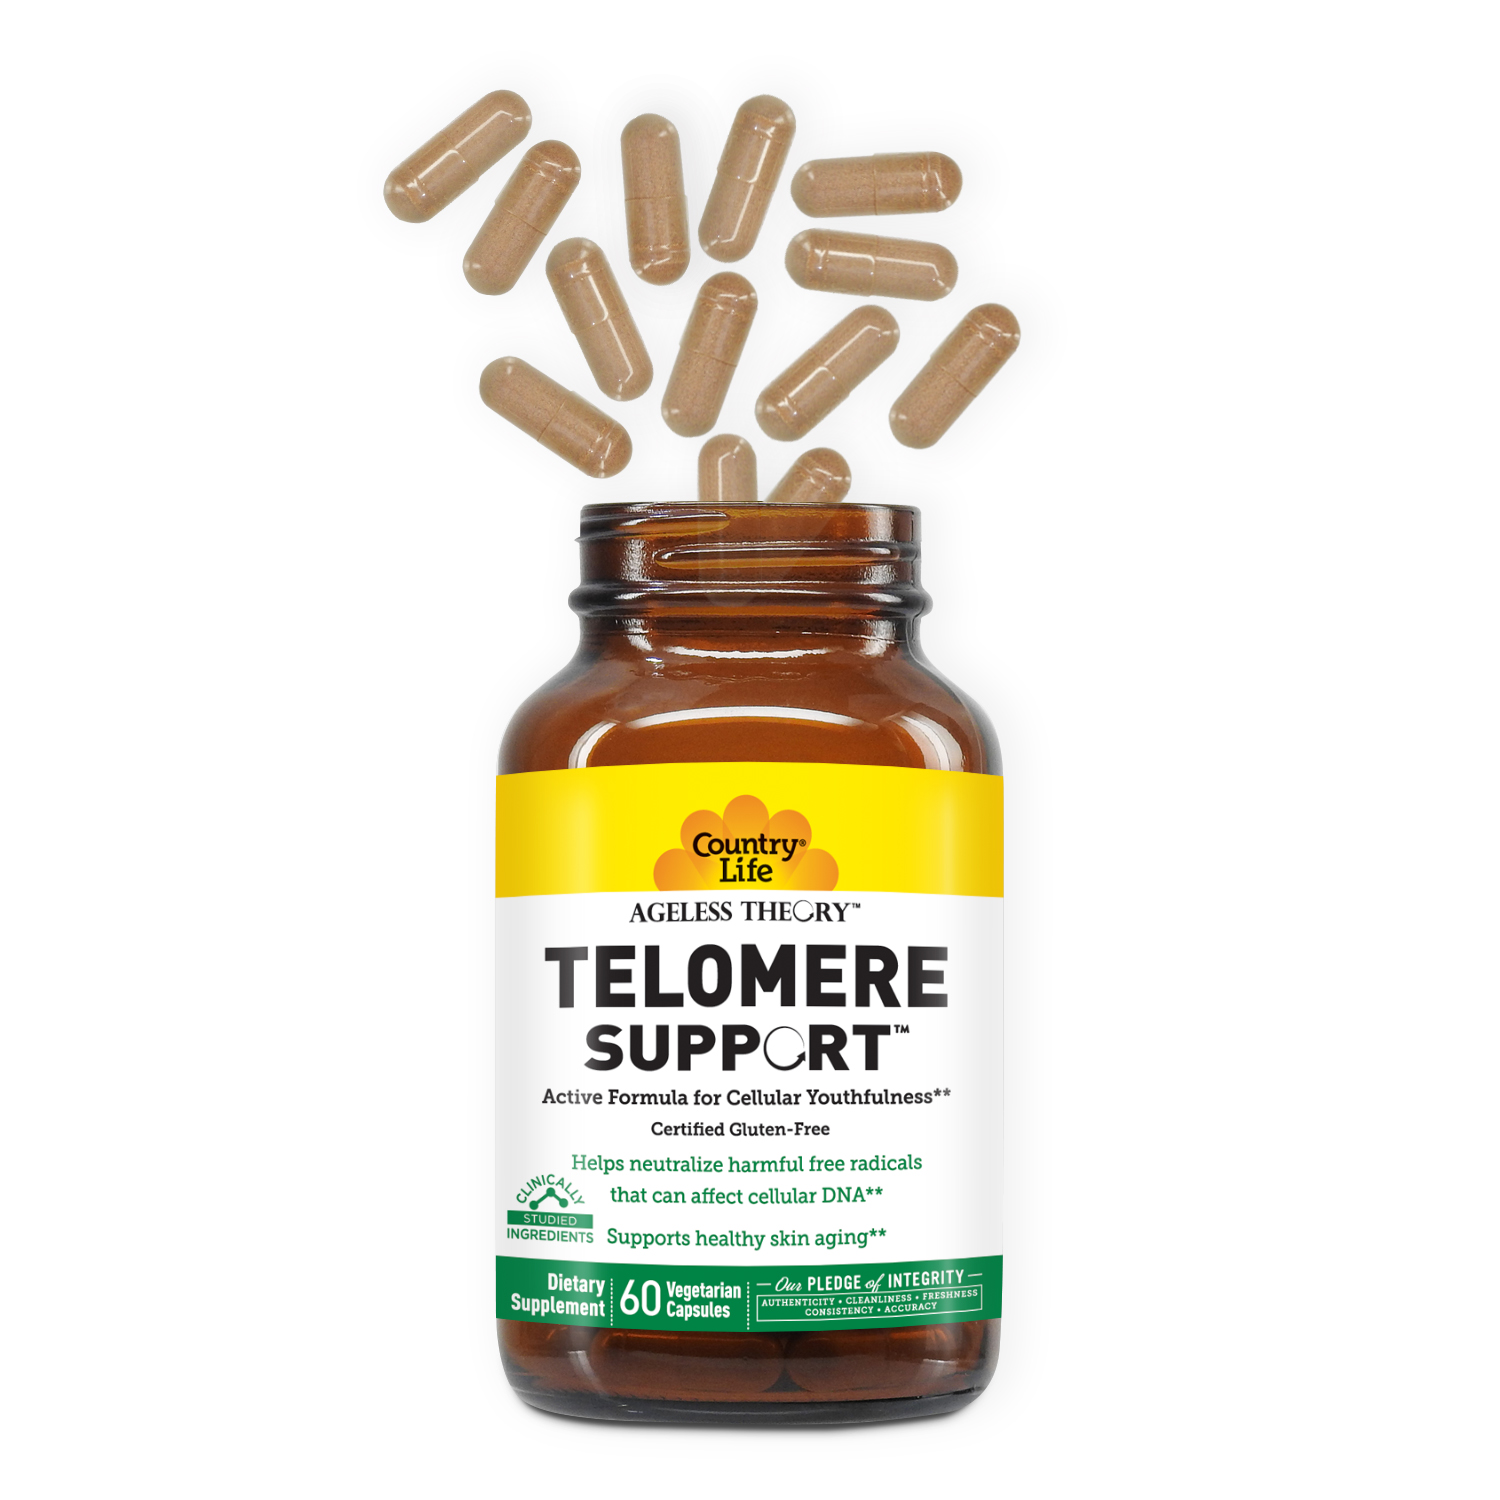 Ageless Theory™ Telomere Support™